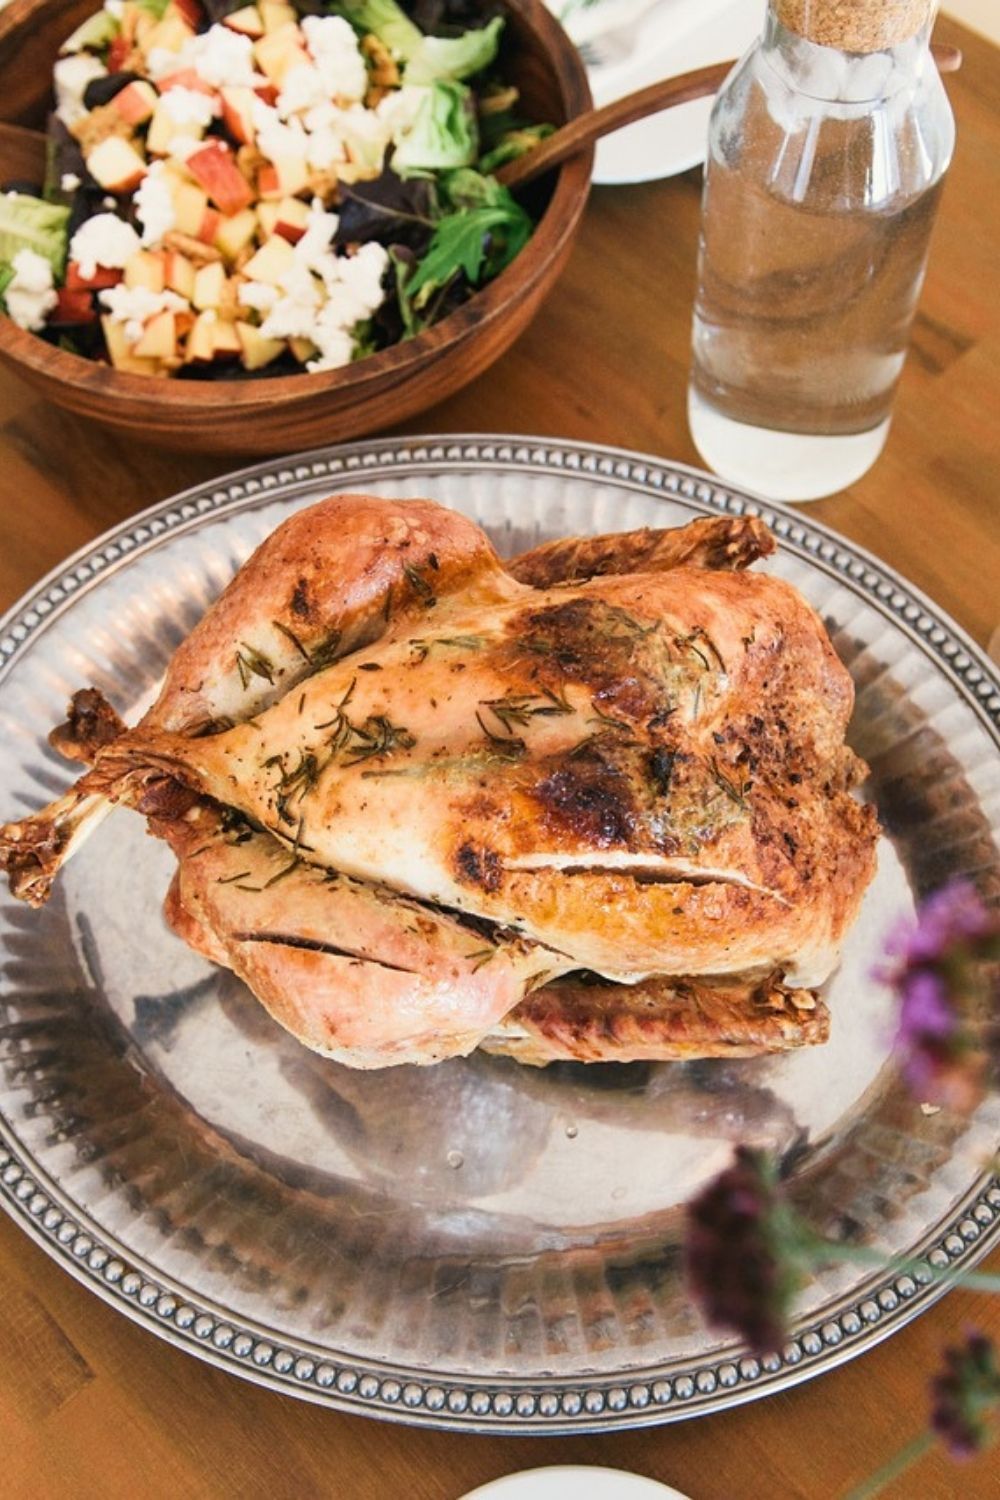 I never truly appreciated this delicious roasted chicken recipe until I got older.